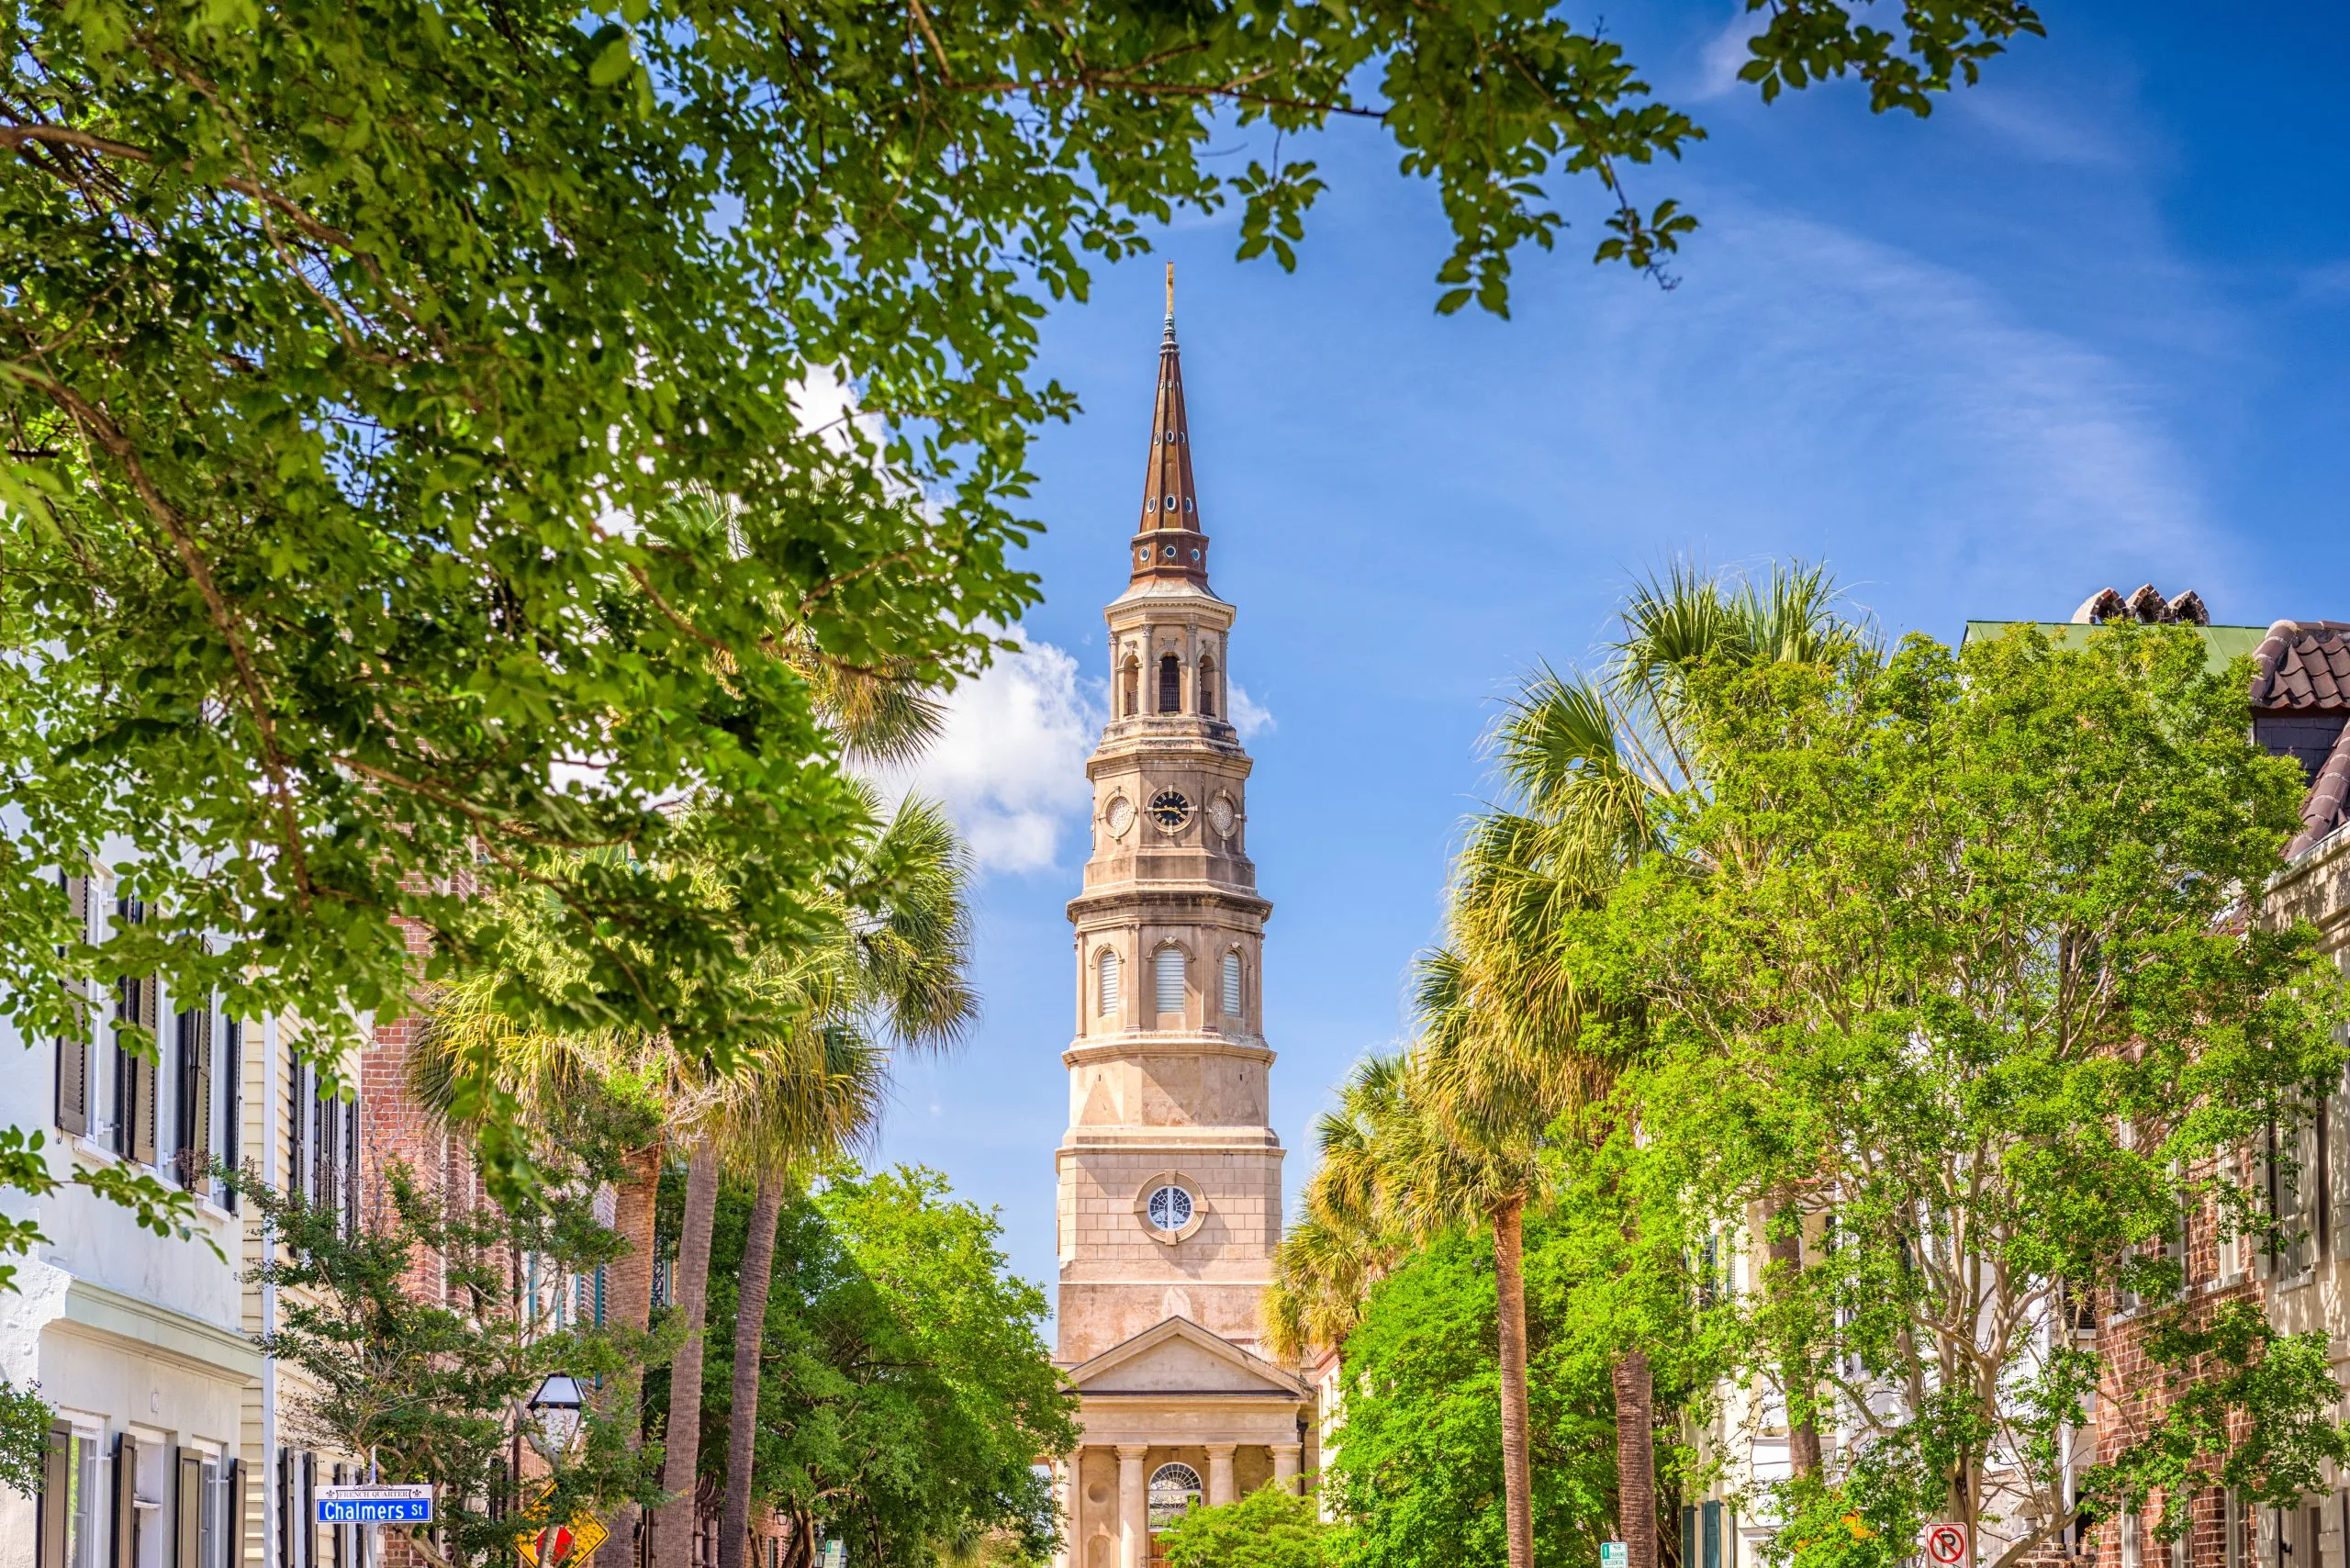 st philips church steeple one of the best photo spots in charleston south carolina